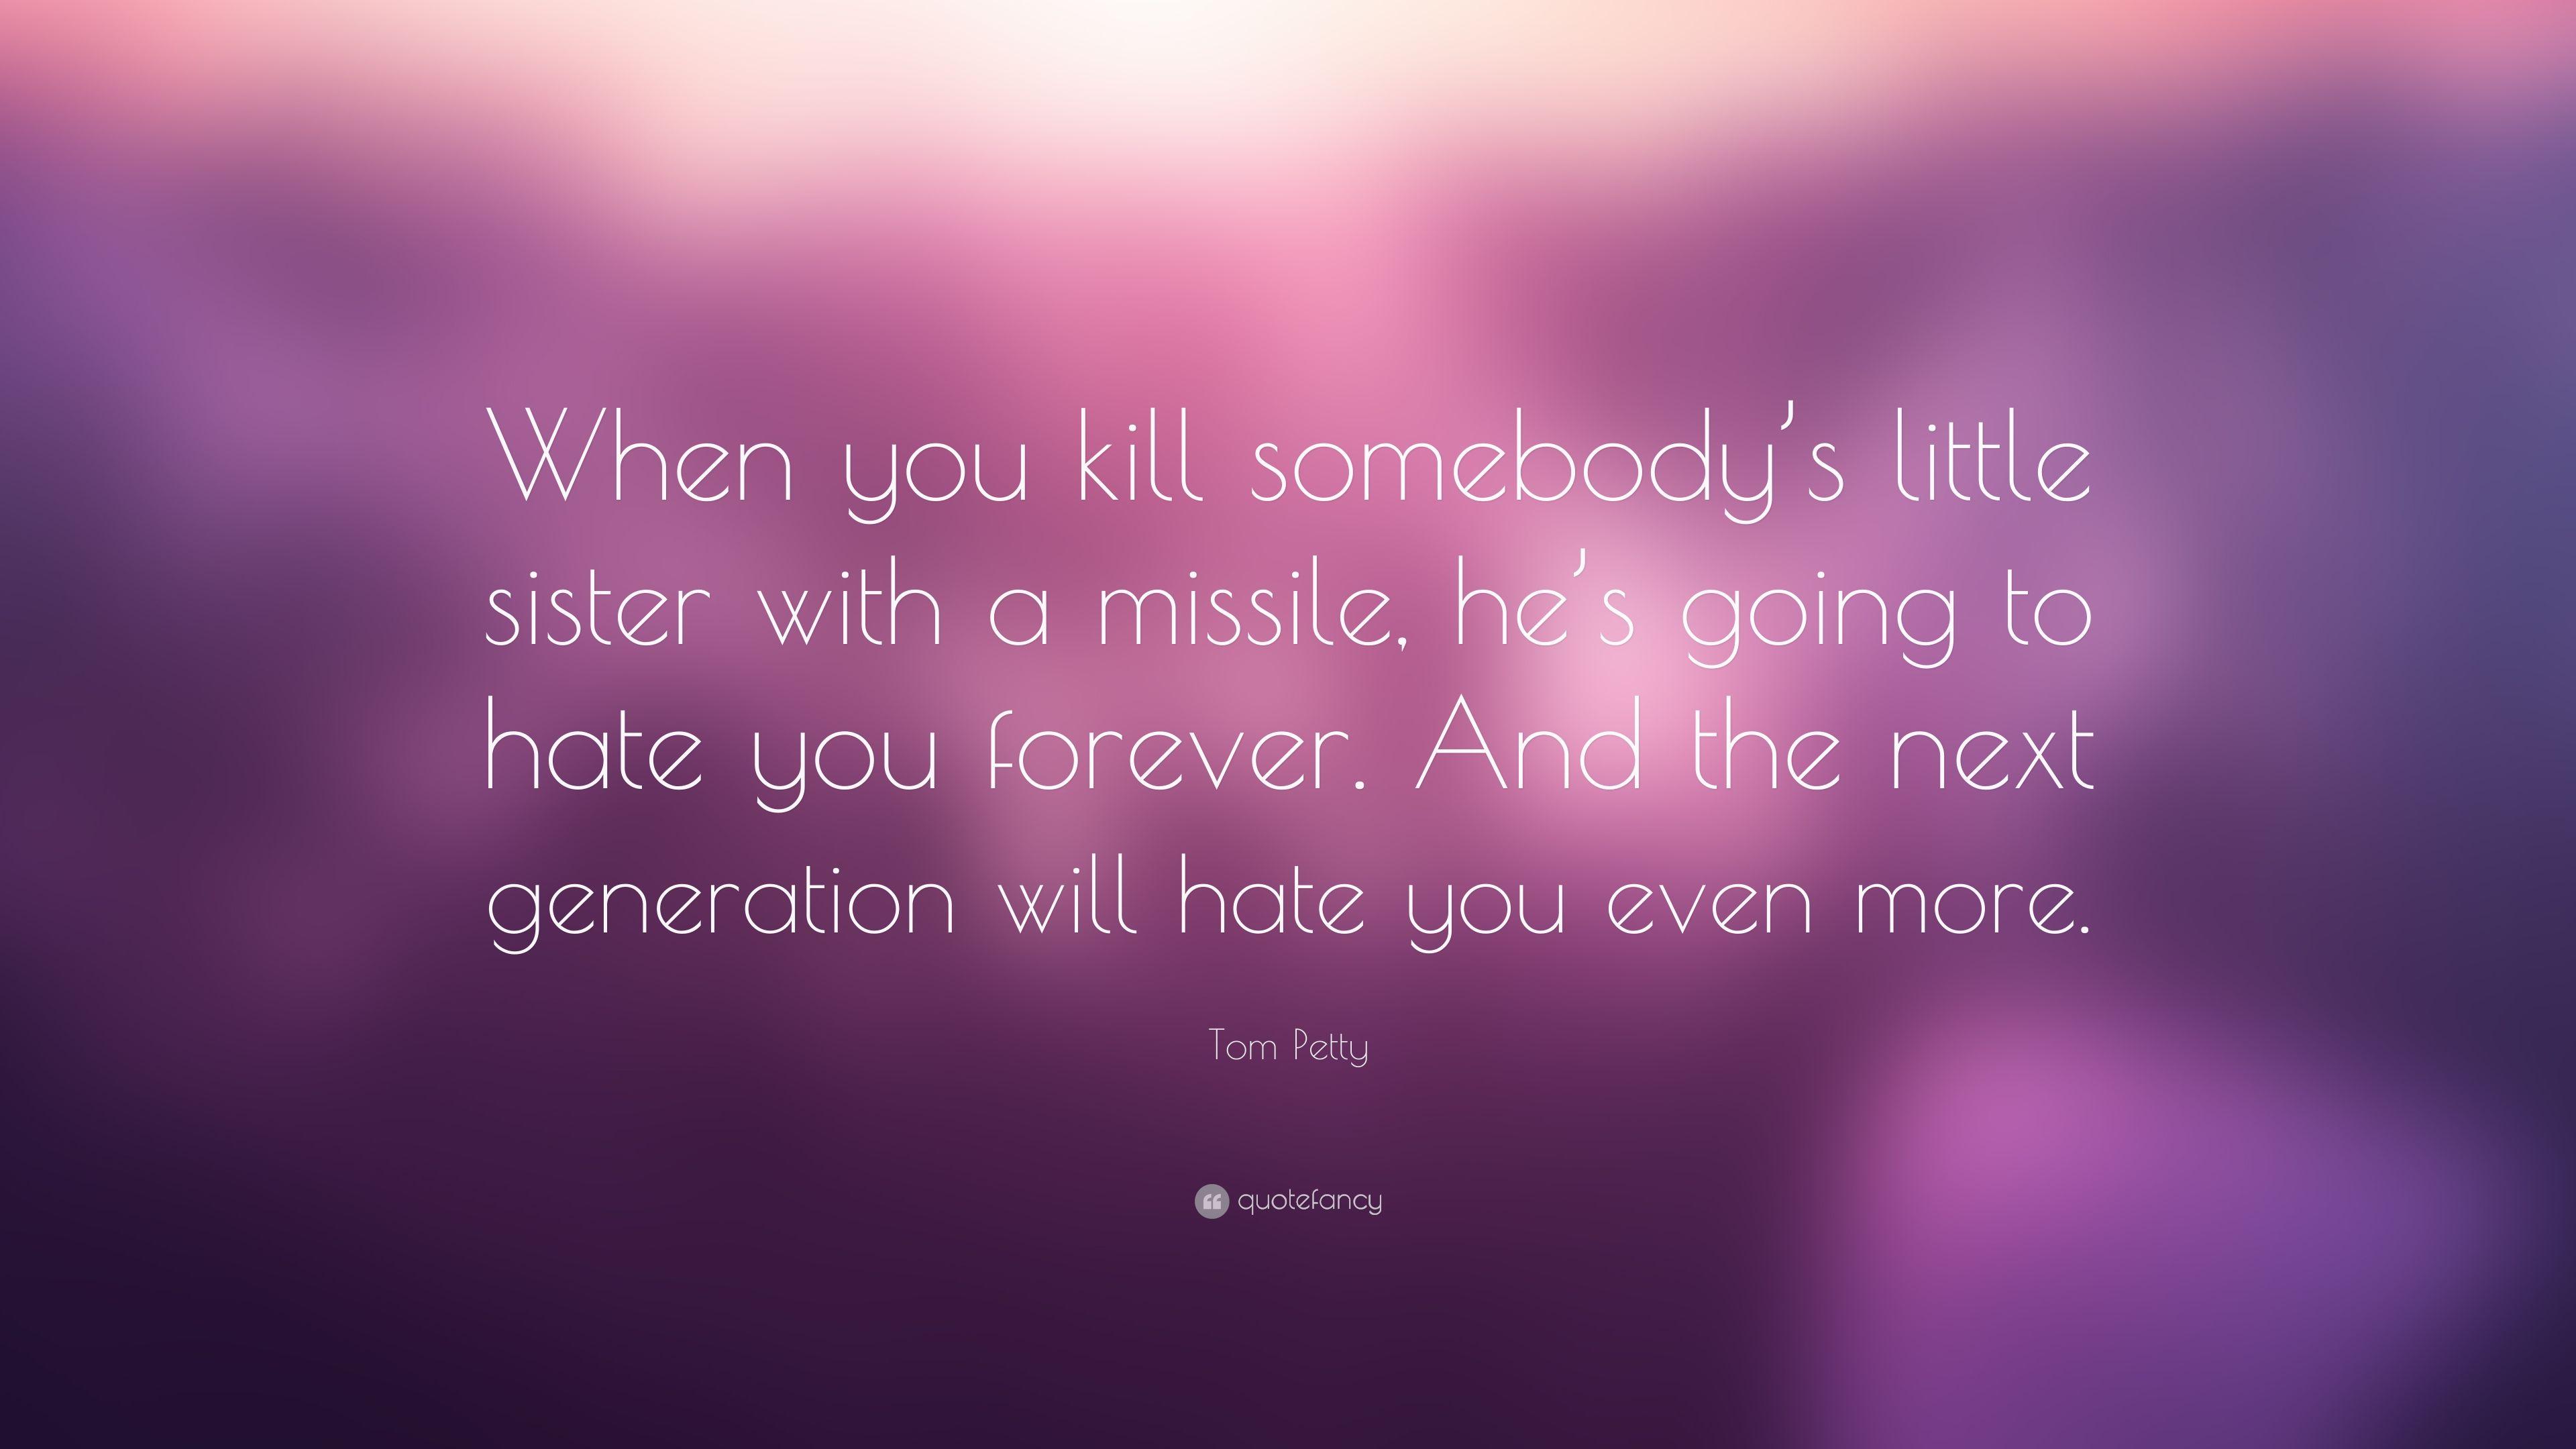 Tom Petty Quote: “When you kill somebody's little sister